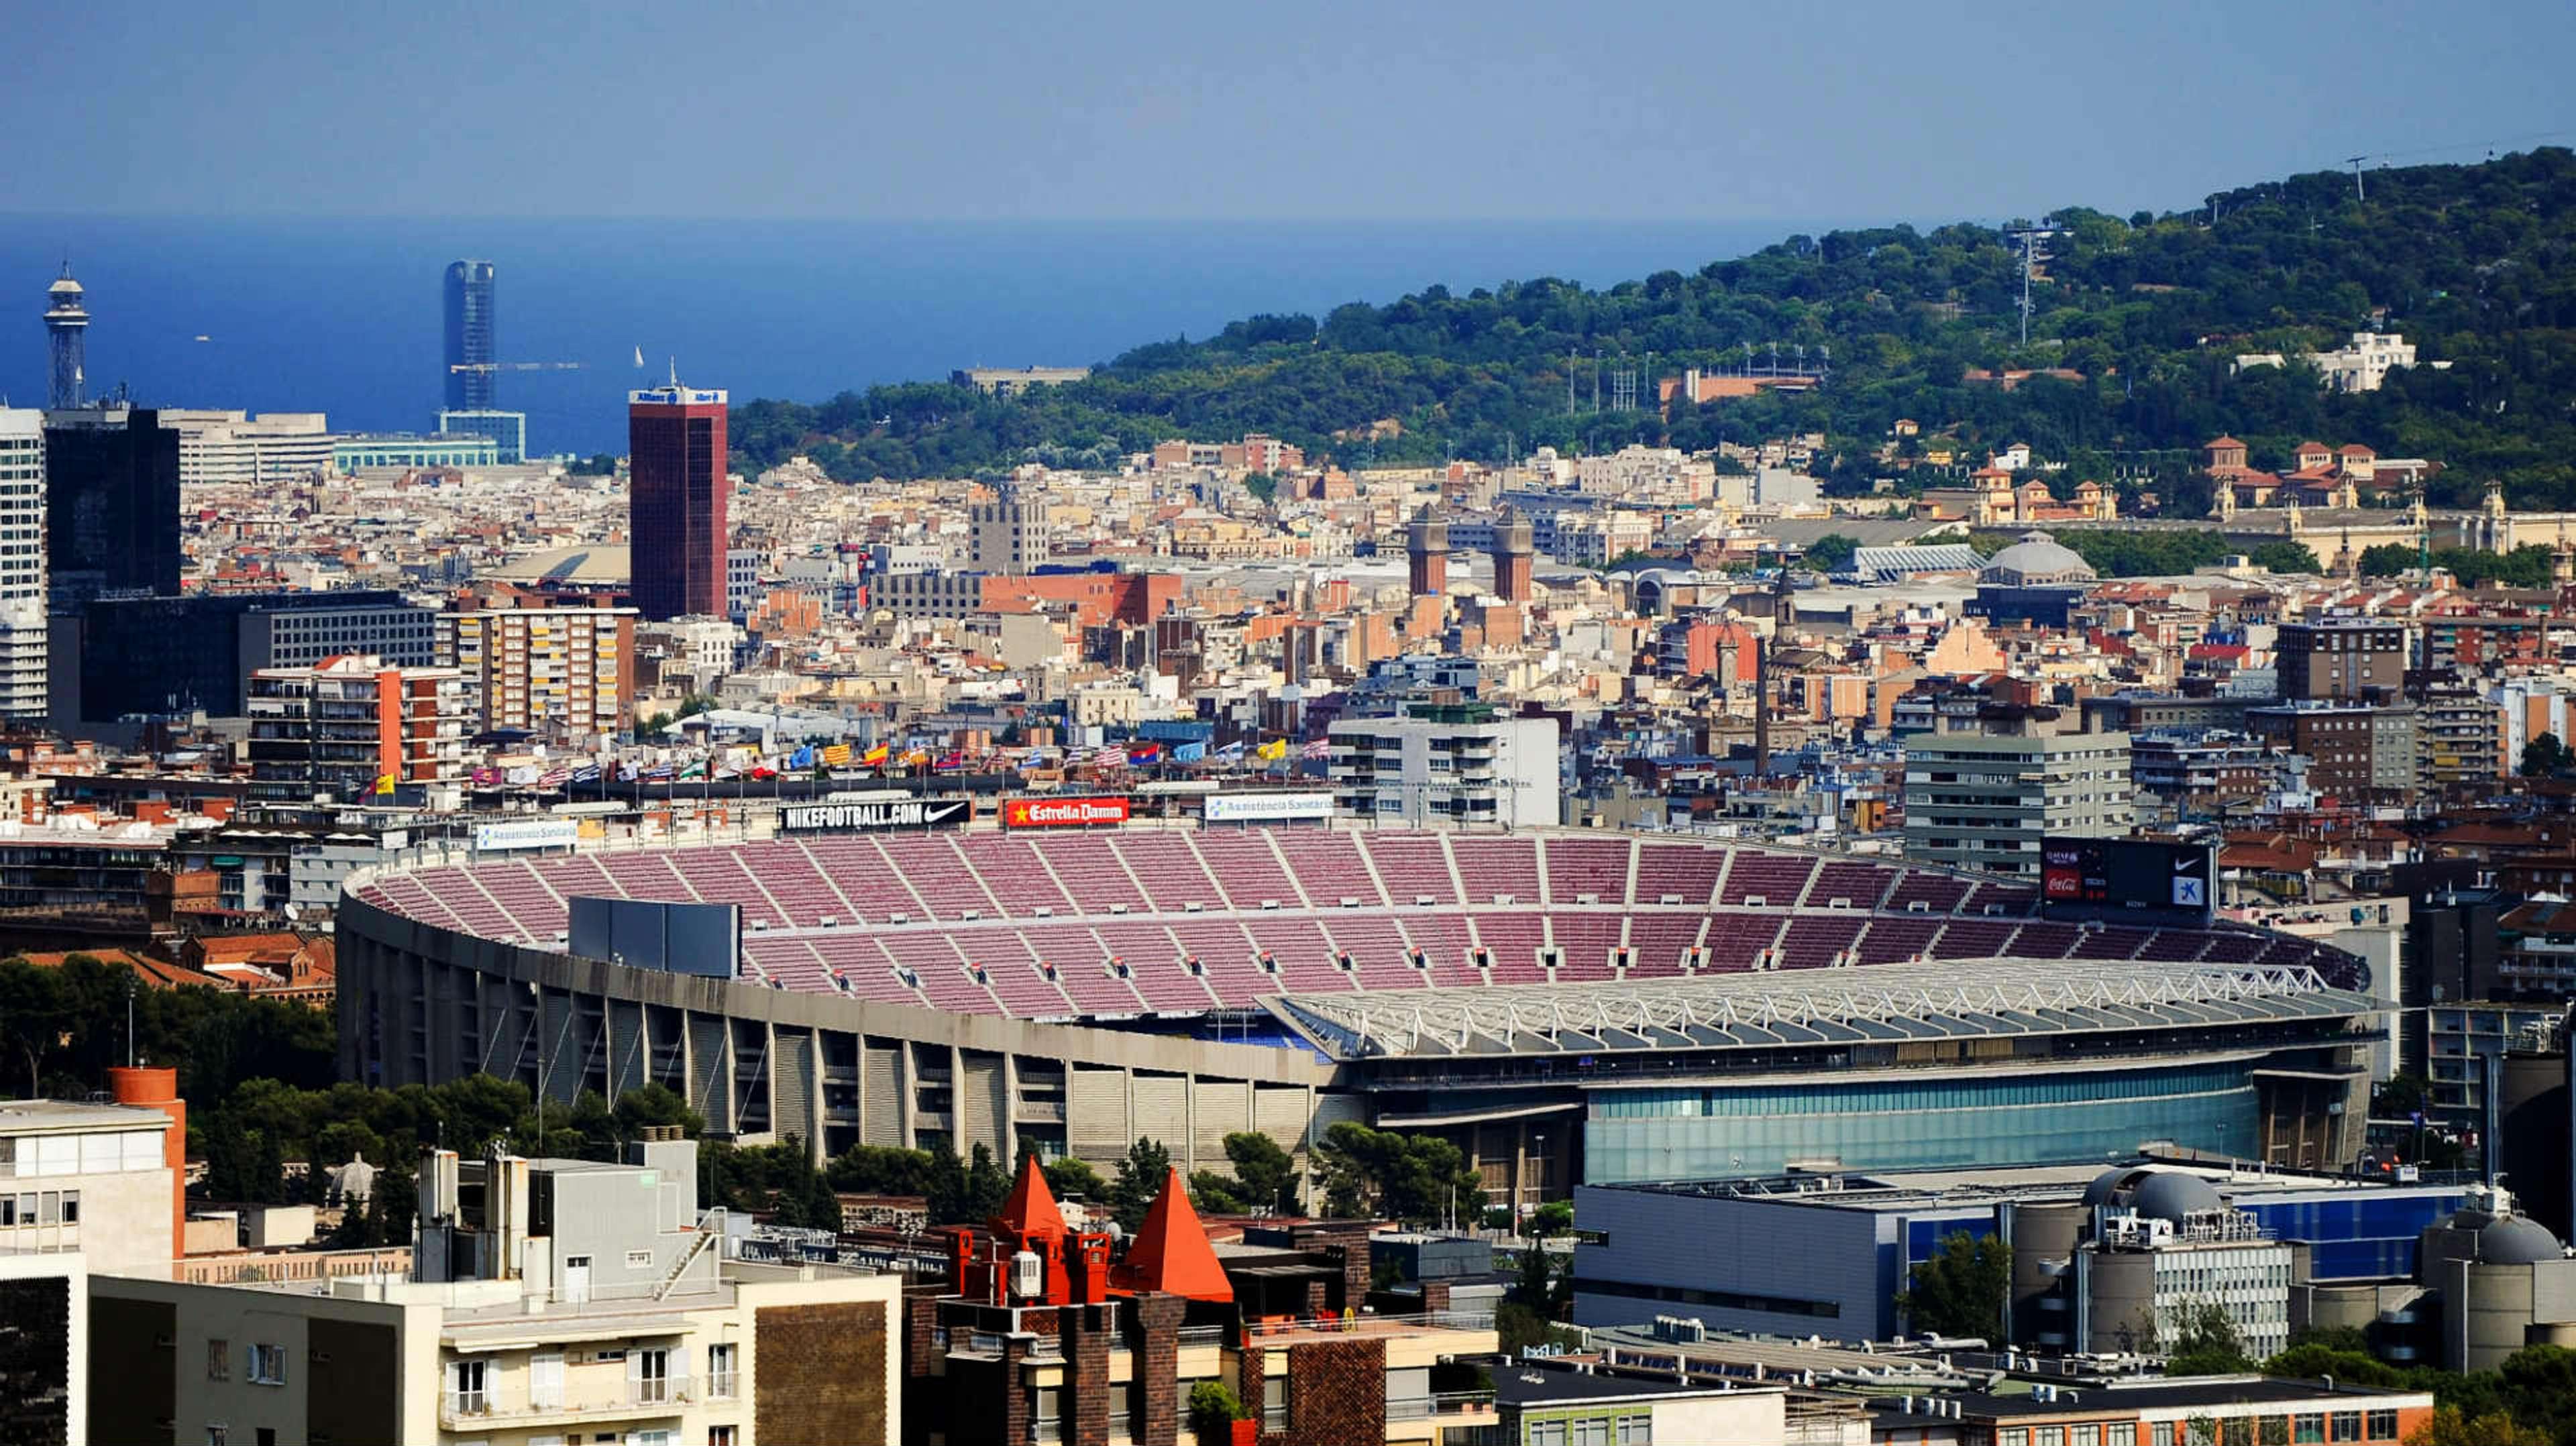 GettyImages-176742923 camp nou